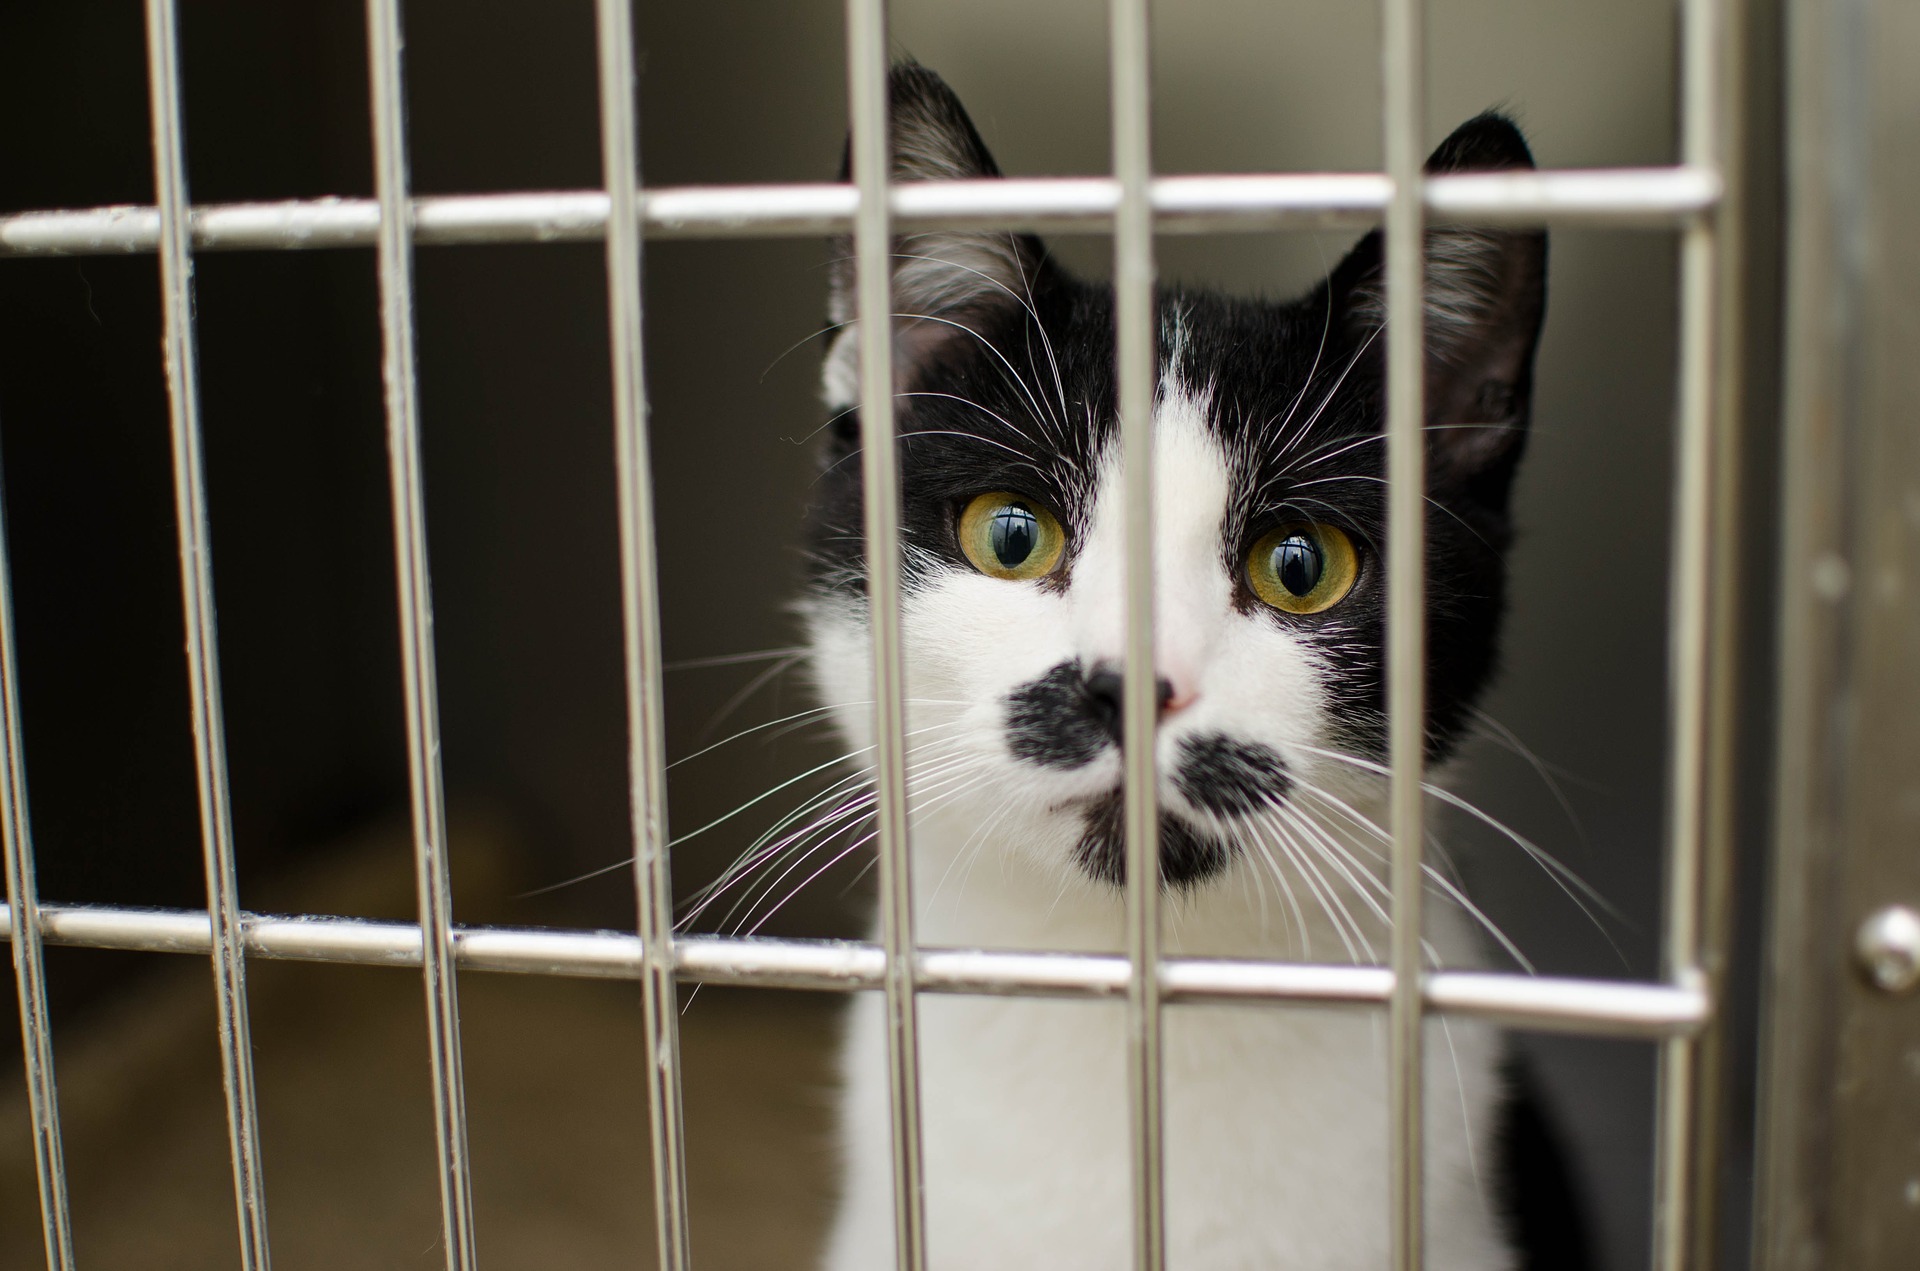 Black and white cat in a kennel